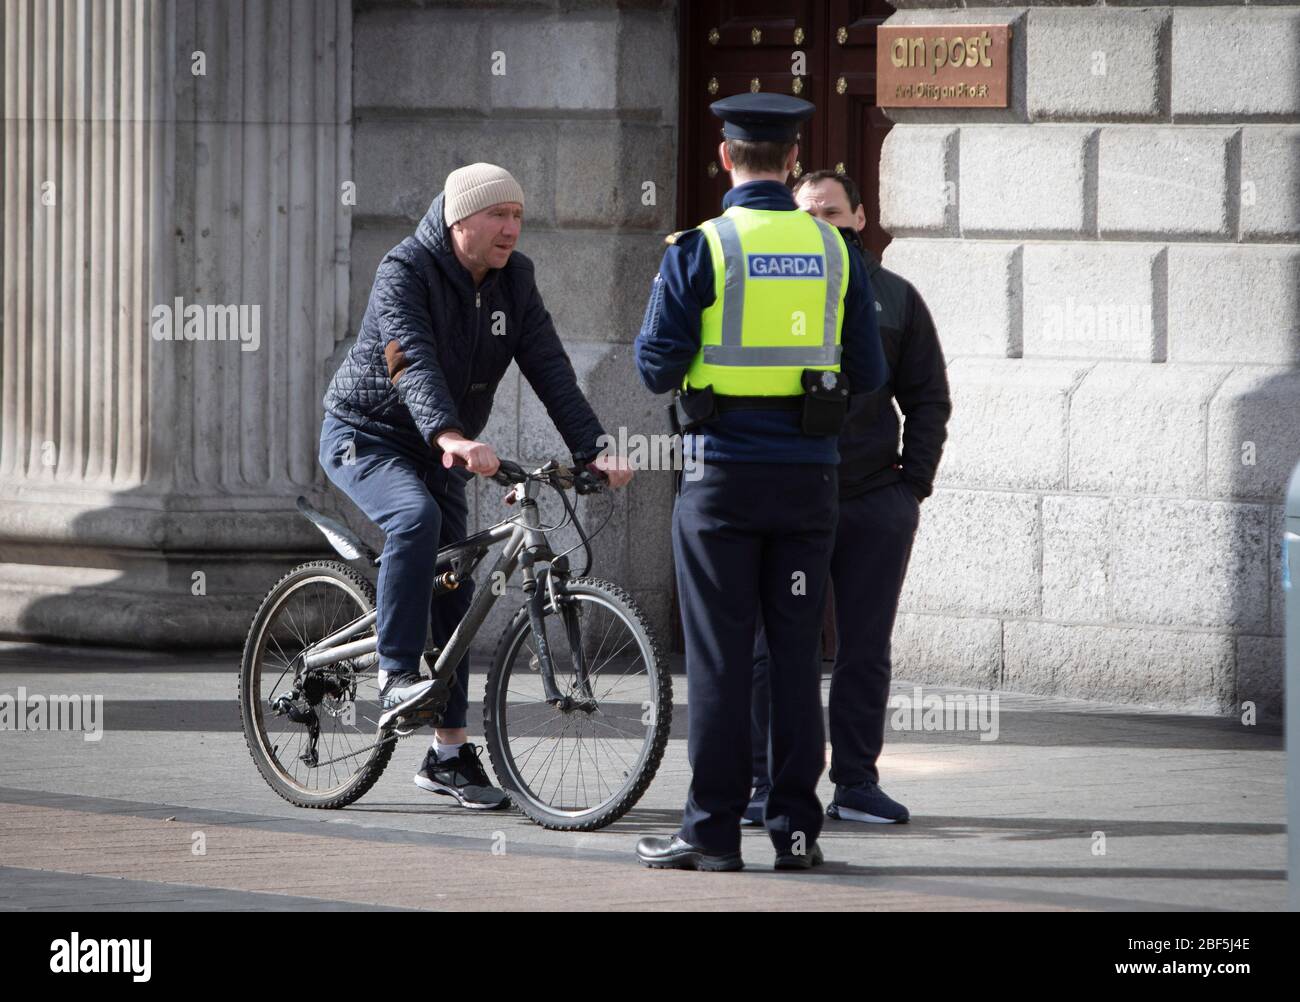 Dublin, Ireland - April 6, 2020: Gardai on patrol during Covid-19 lockdown restrictions on movement in the city centre. Stock Photo